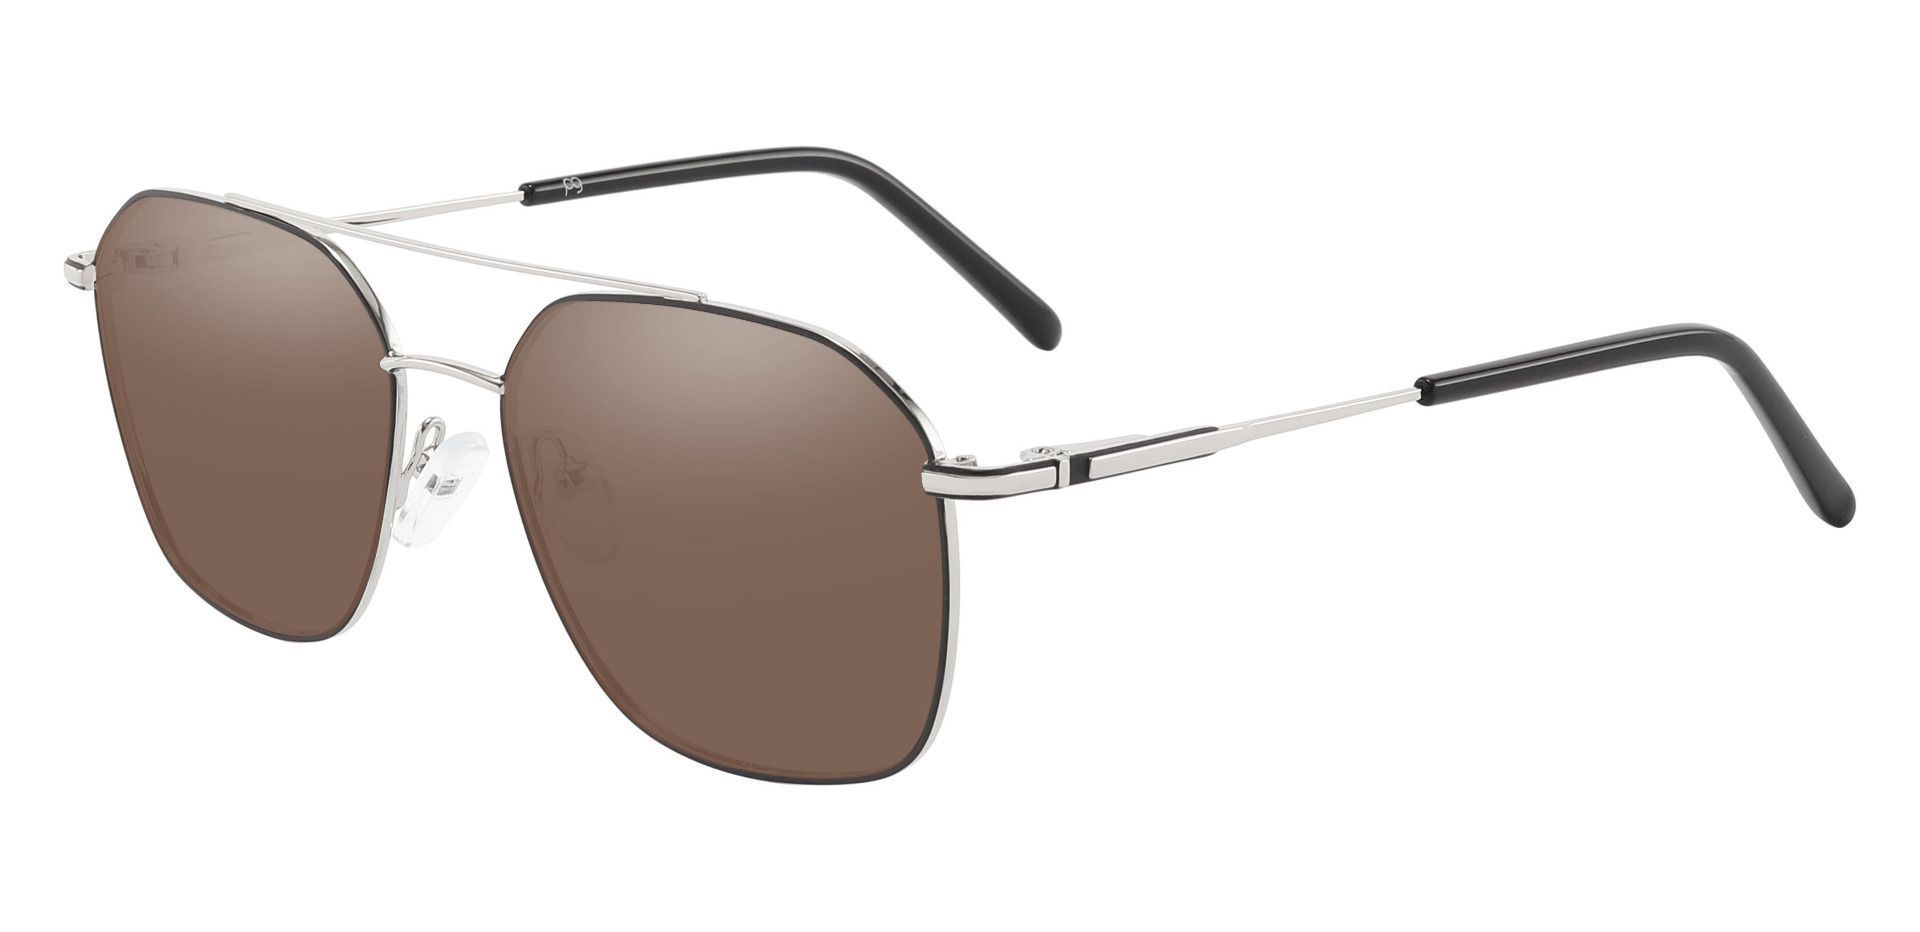 Harvey Aviator Non-Rx Sunglasses - Silver Frame With Brown Lenses